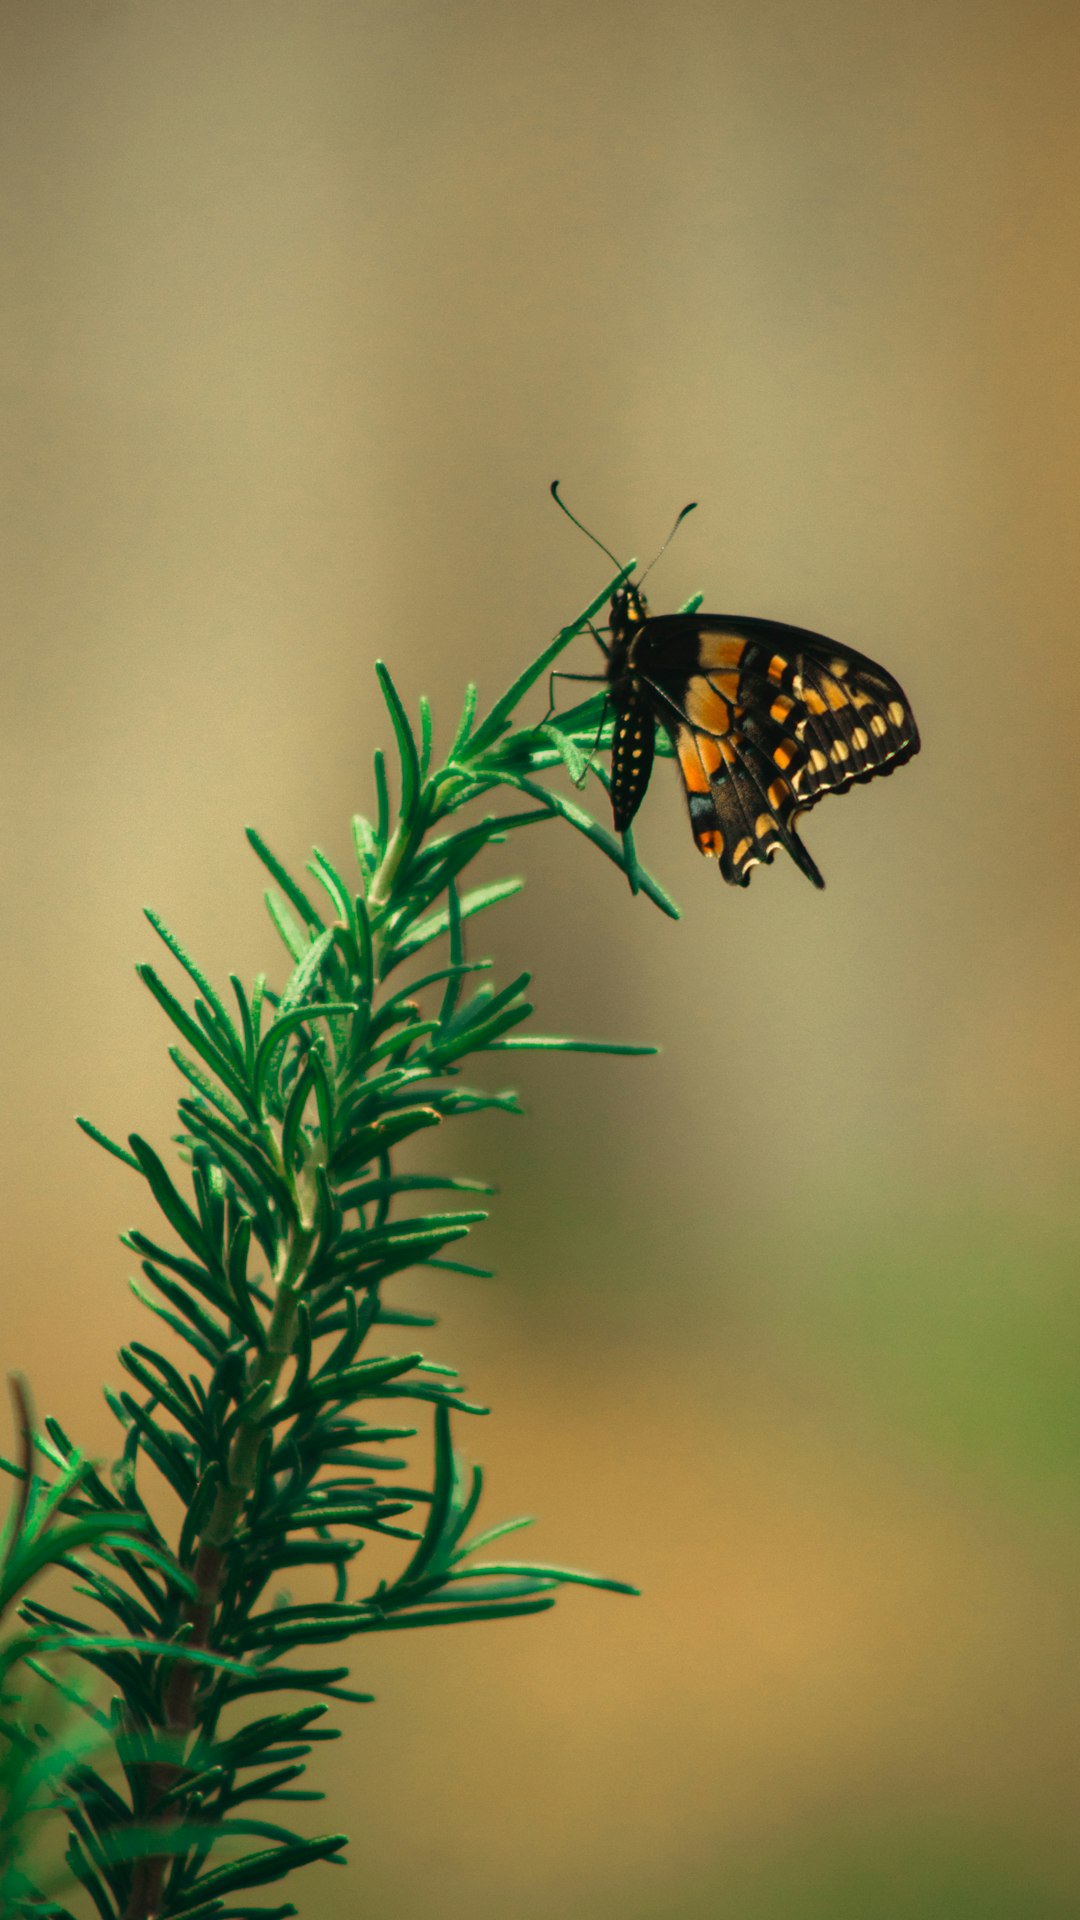 black and brown butterfly perched on green plant